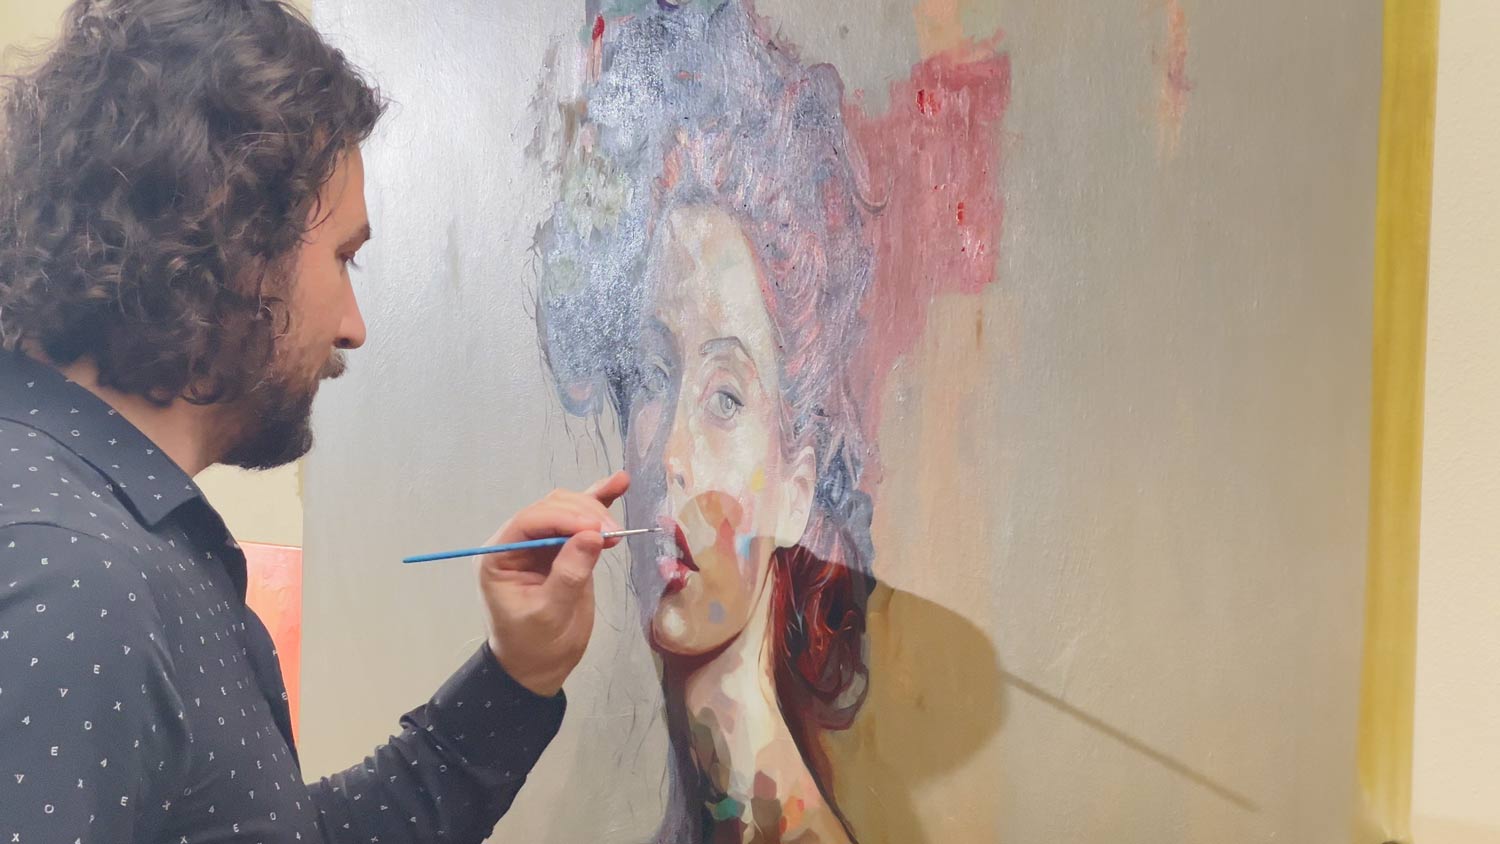 Artist Alex Righetto at work on 'Mona Lisa's Daughter', skillfully applying brushstrokes to the canvas.